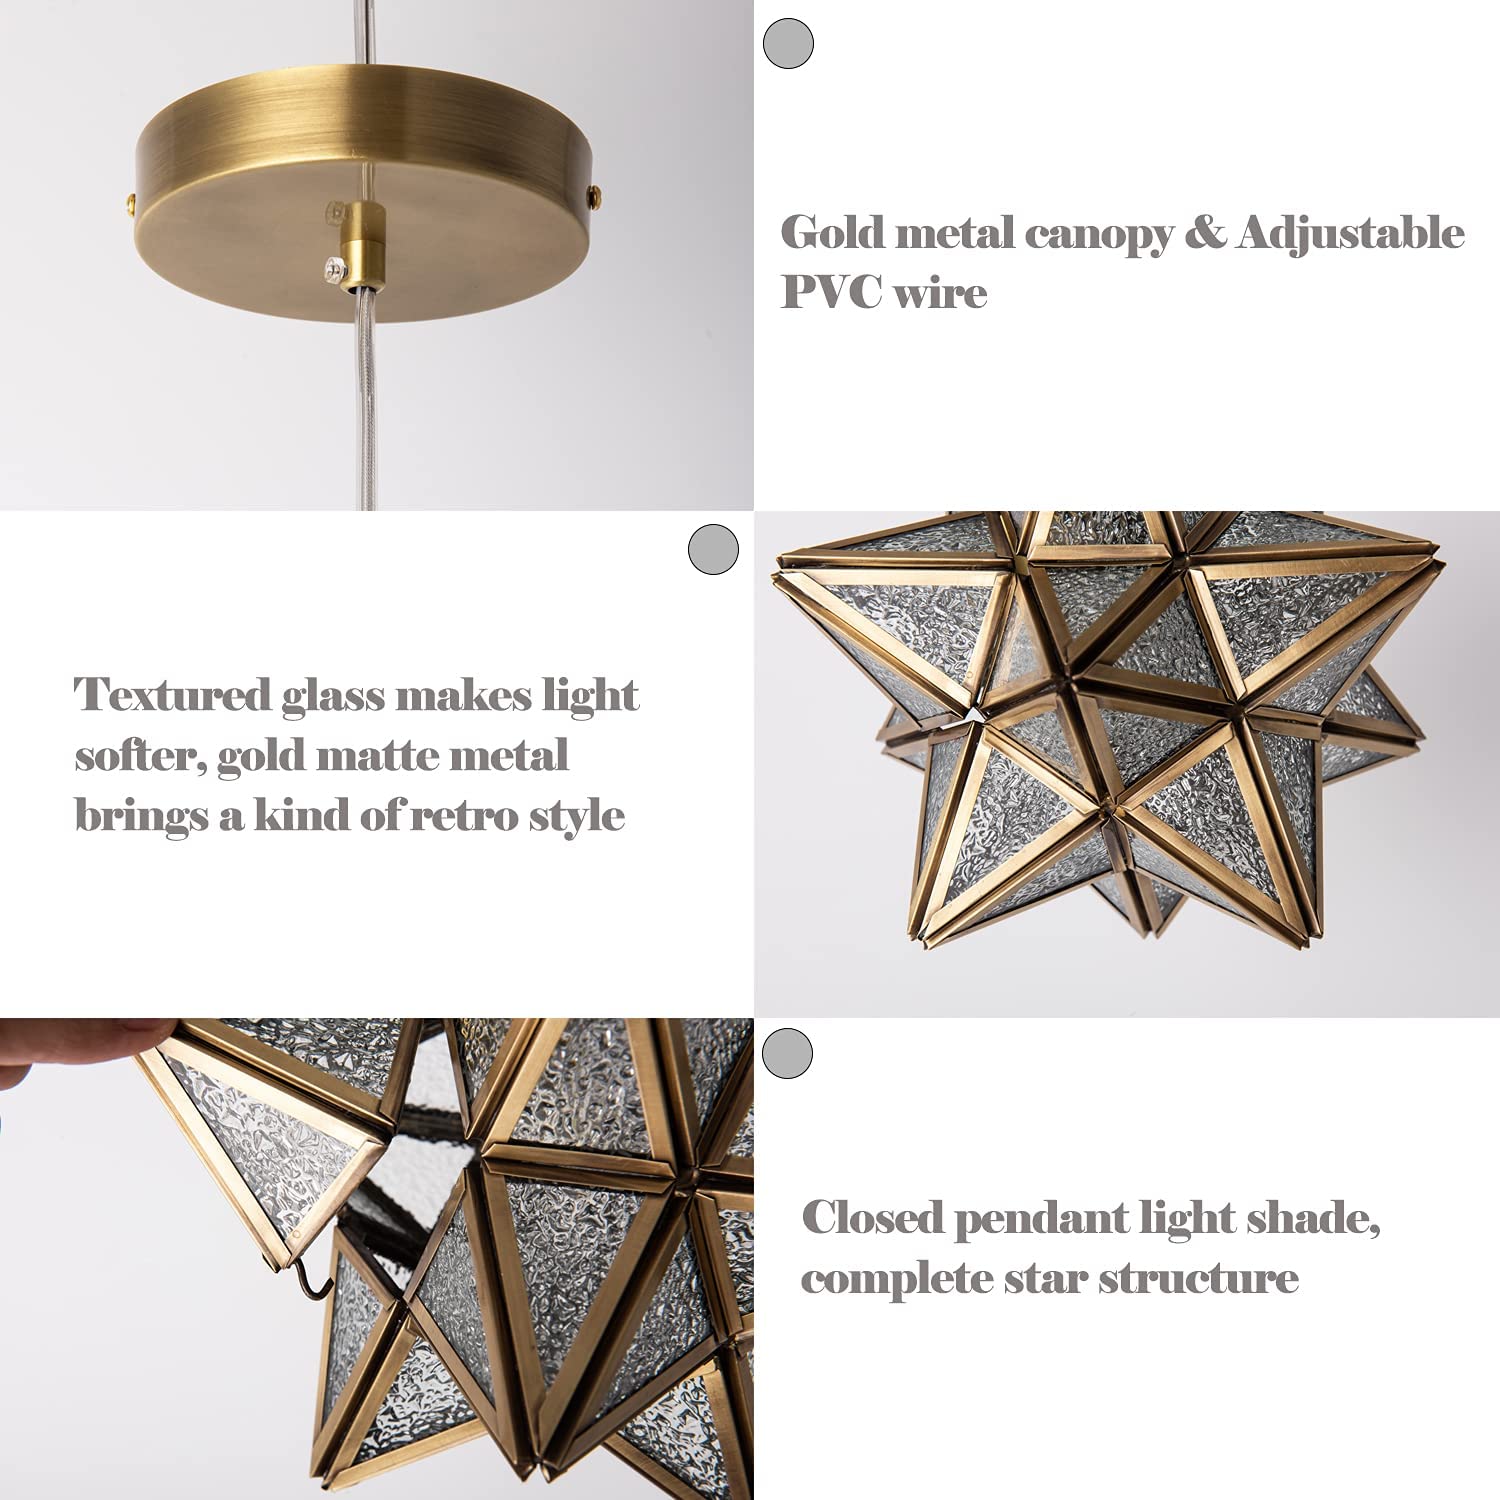 Movarian pendant light vintage star pendant lamp with gold finish